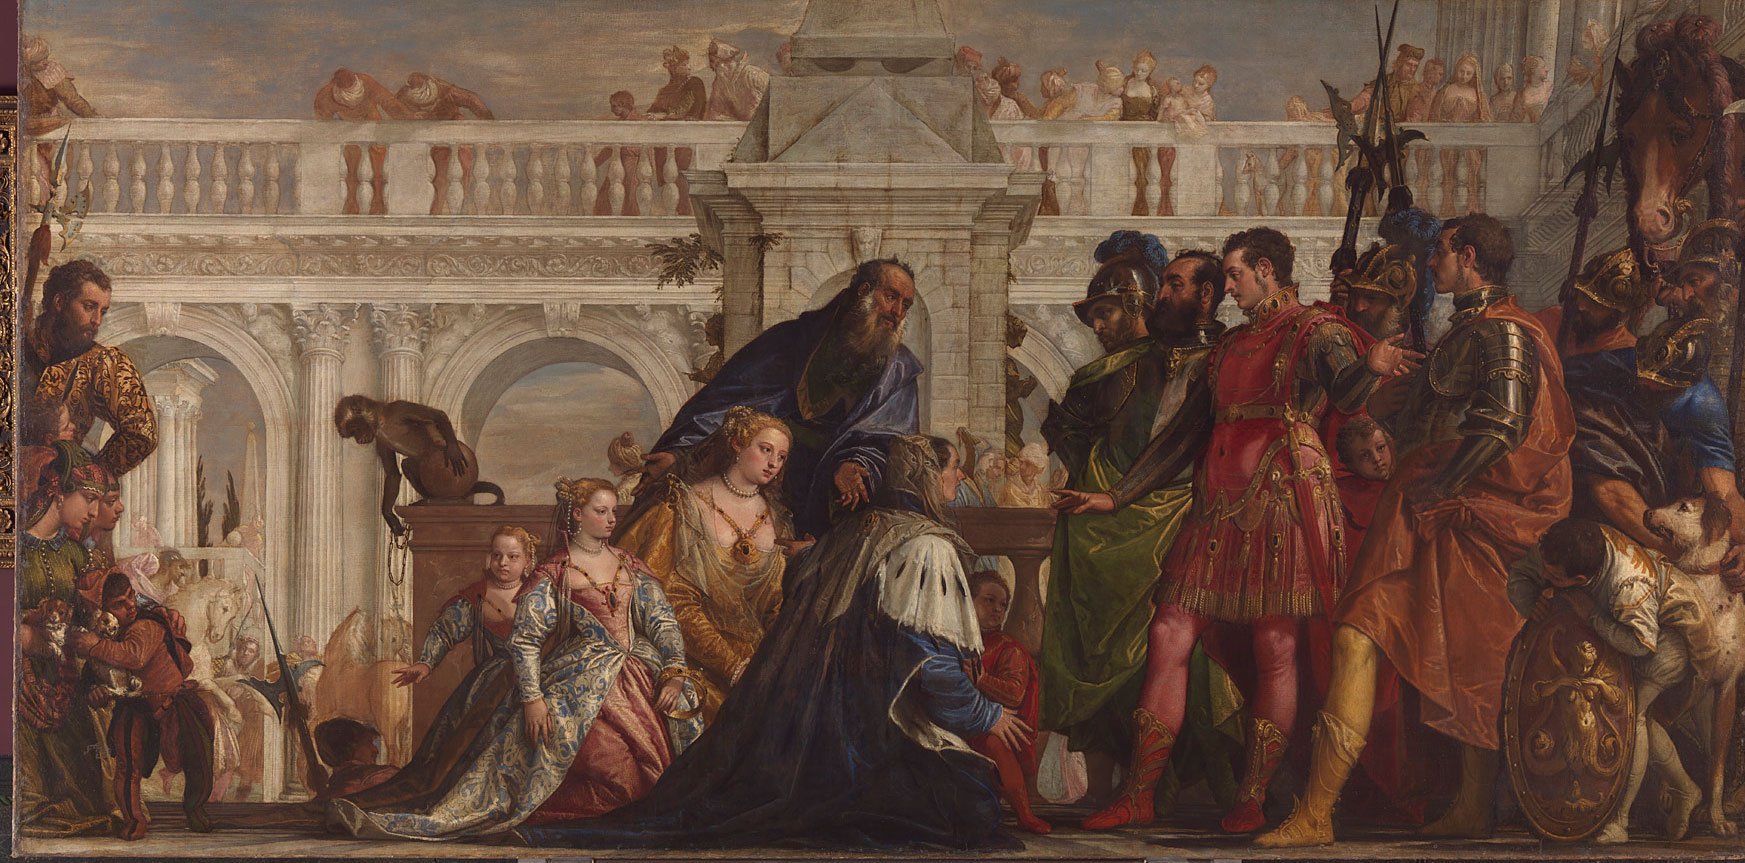 Paolo Veronese (1528-1588), “The Family of Darius before Alexander,” 1565-7. Oil on canvas, 236.2 × 474.9 cm © The National Gallery, London